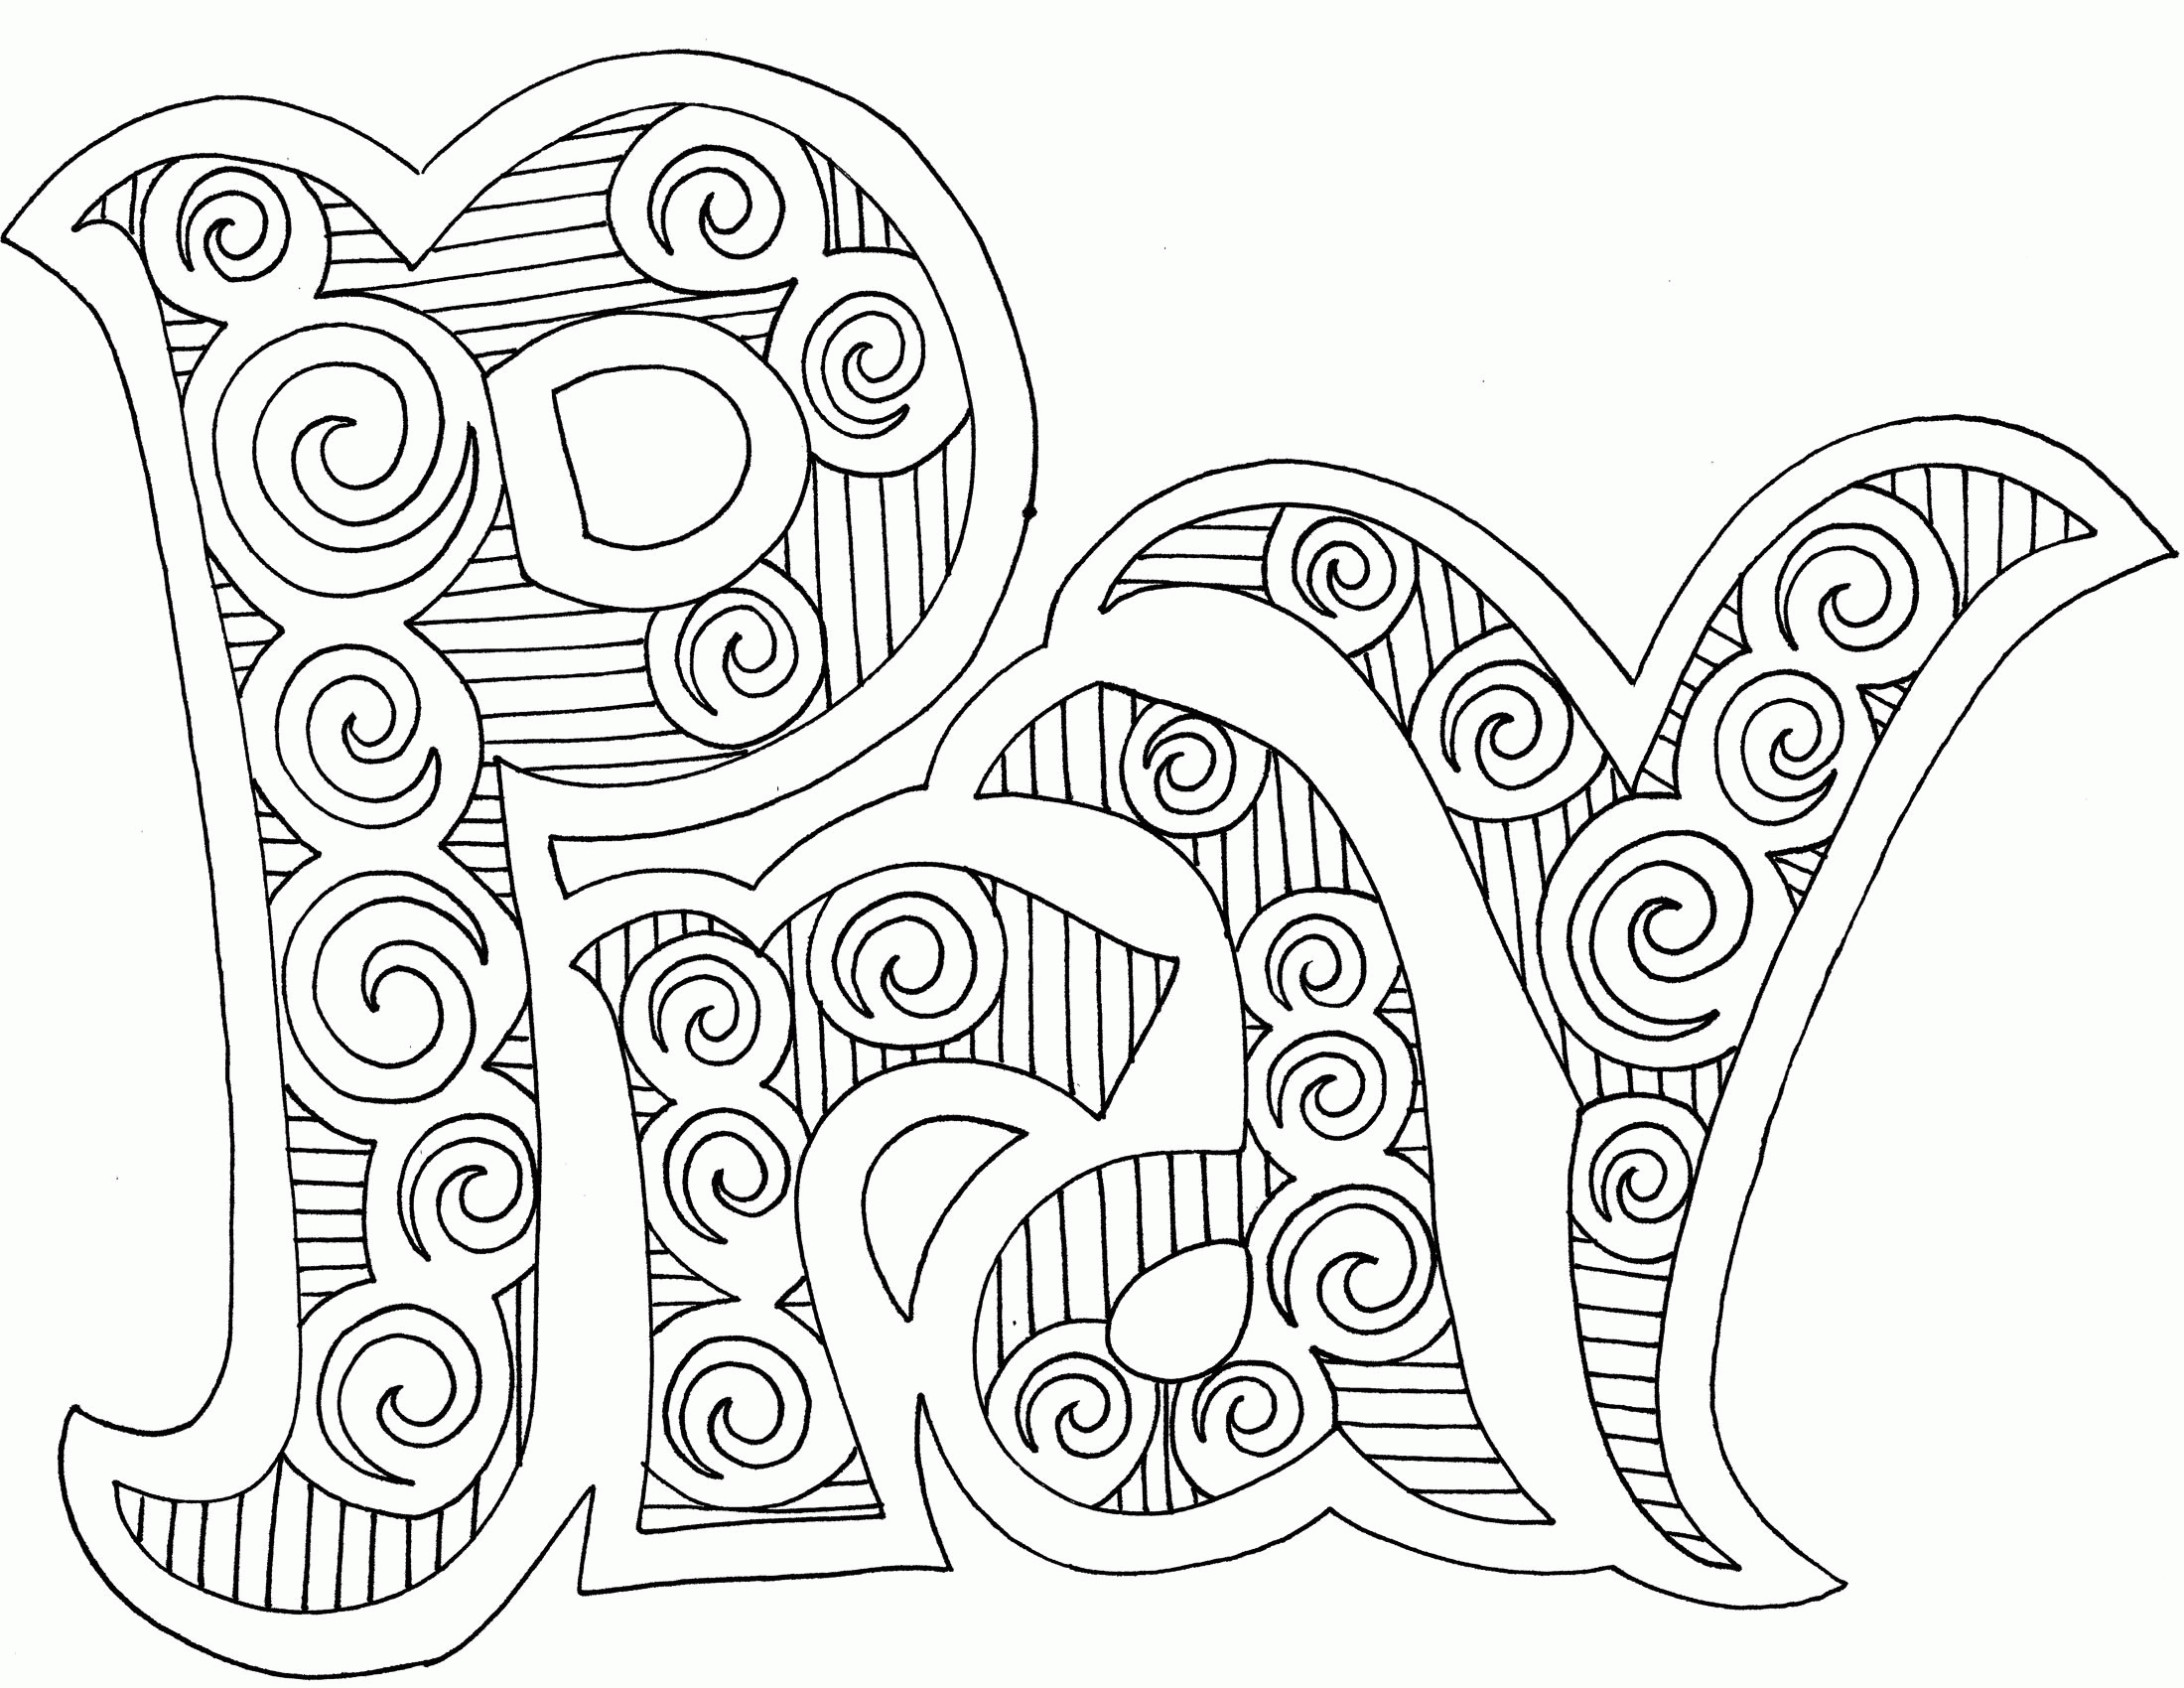 Fun Coloring Pages For 9 Year Olds - Coloring